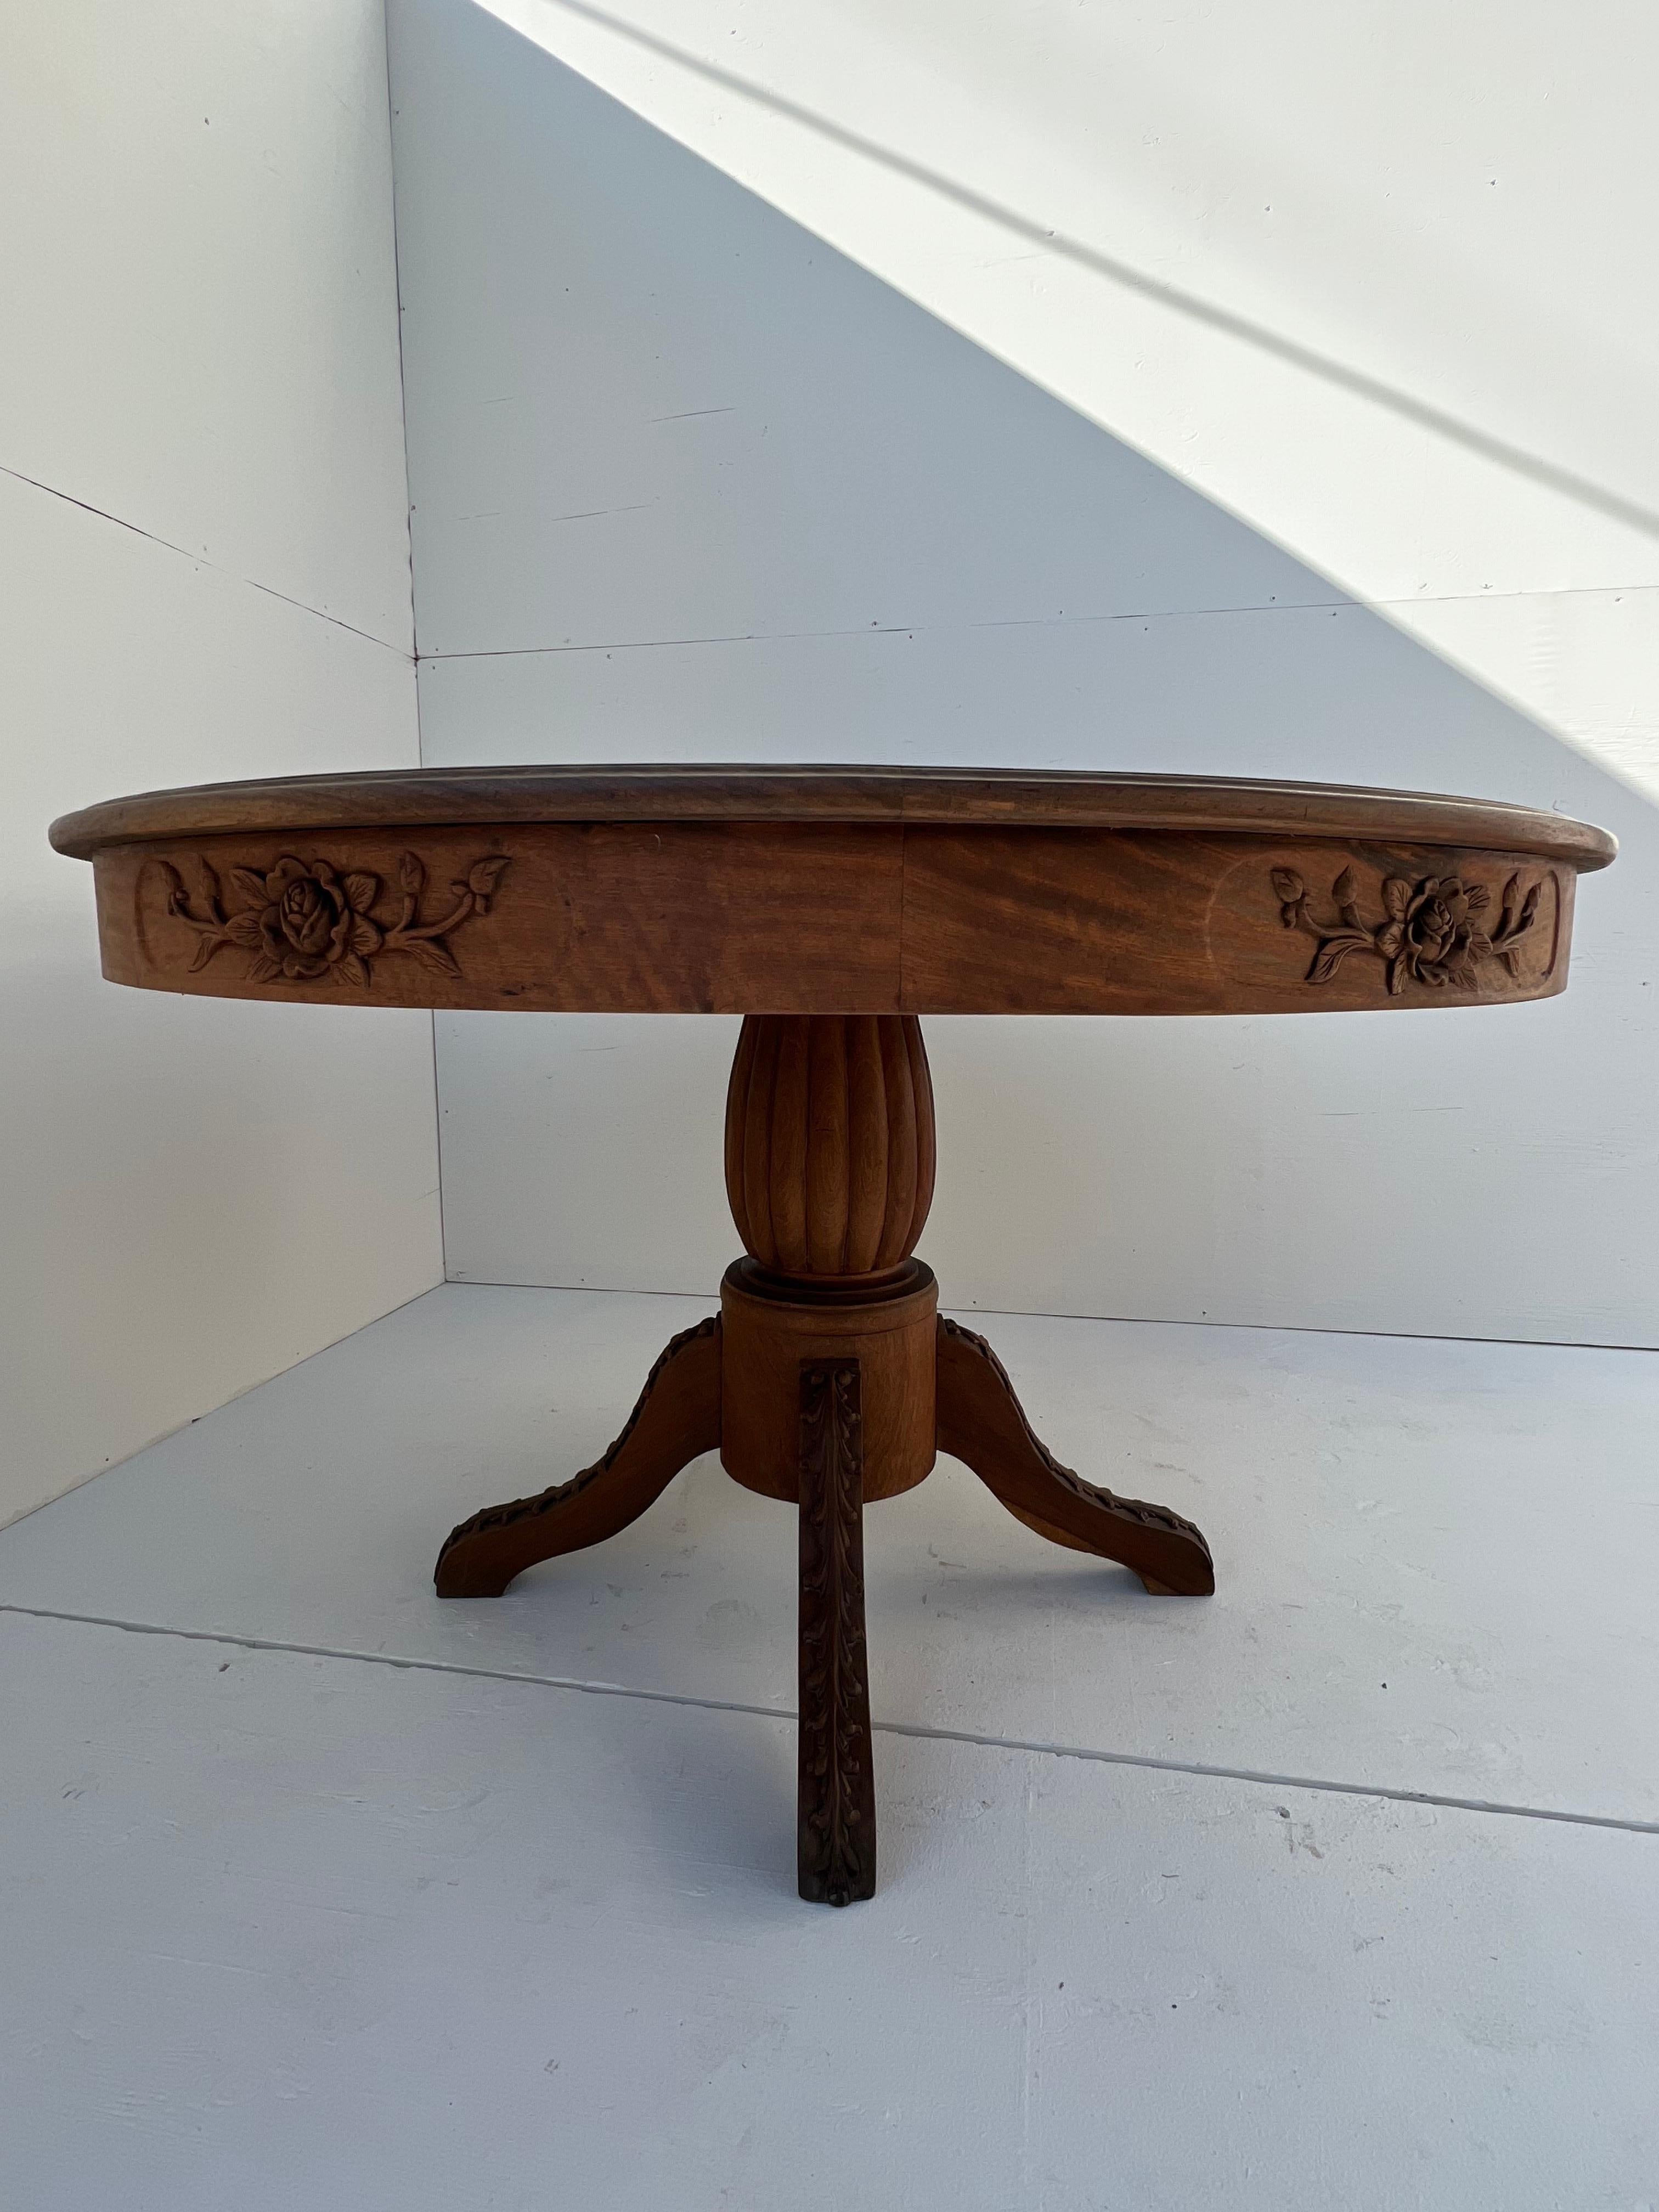 Vietnamese French Colonial Craved Teak Dinning Table 1930's For Sale